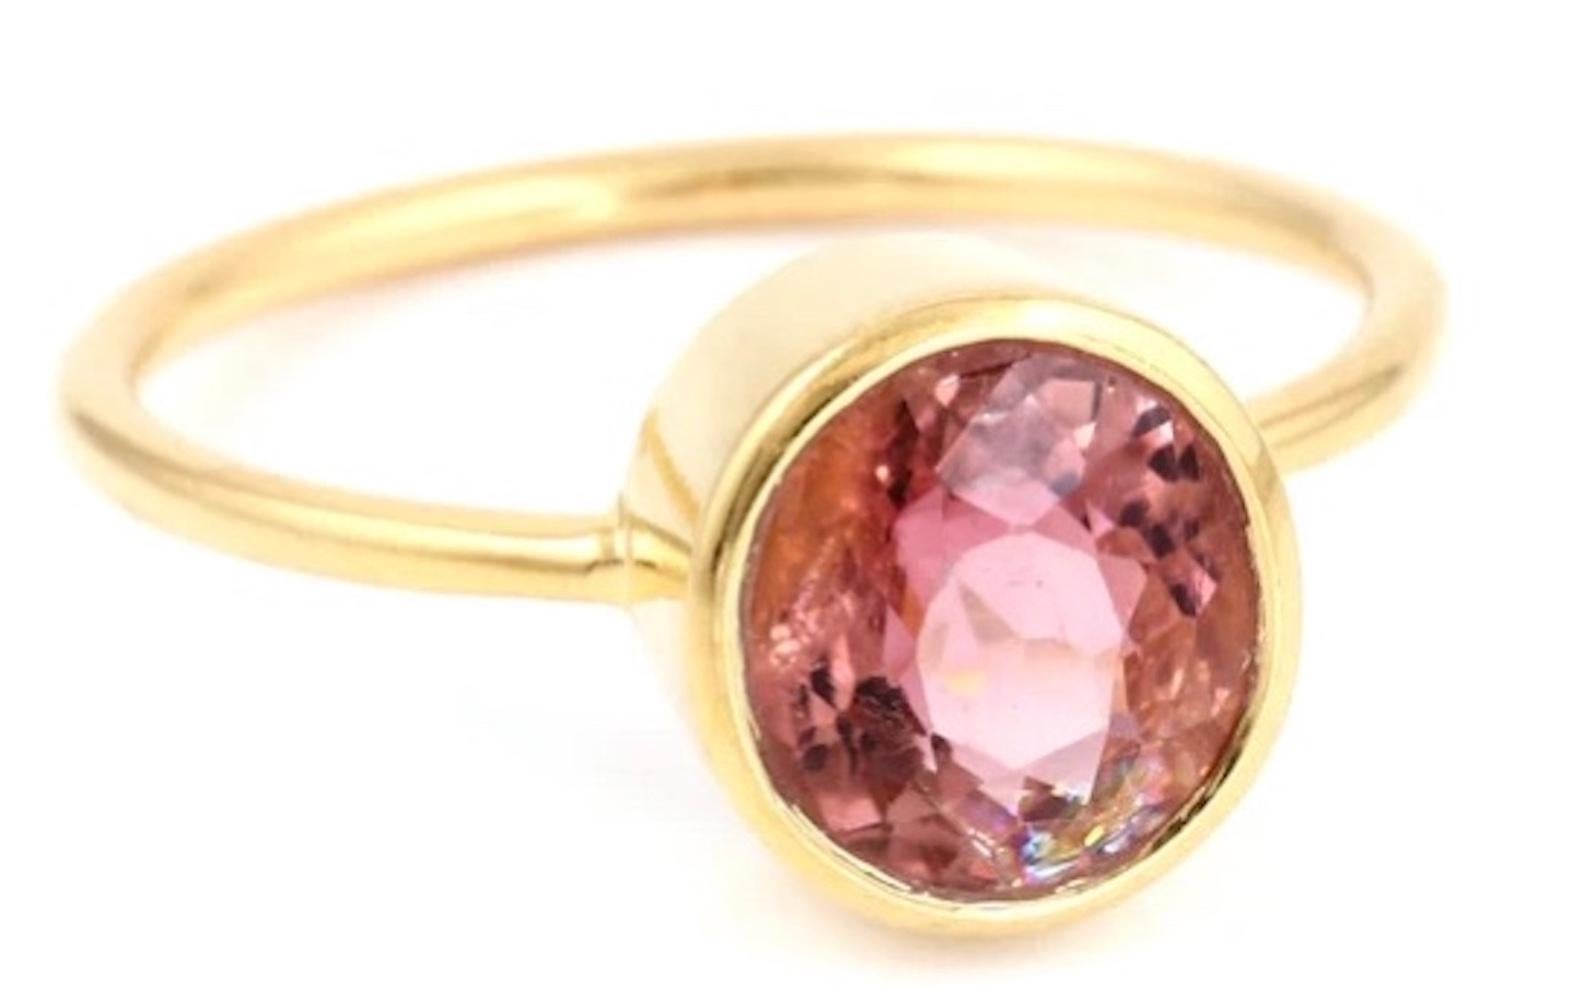 Pink Currant Tourmaline Dress Ring features a bezel set pink tourmaline . A simple yet stylish dress ring.

- Pink Tourmaline 1.90 carats.
- Set in 22 karat ion plated gold over sterling silver.
- Ring is currently size 7 and resizable.